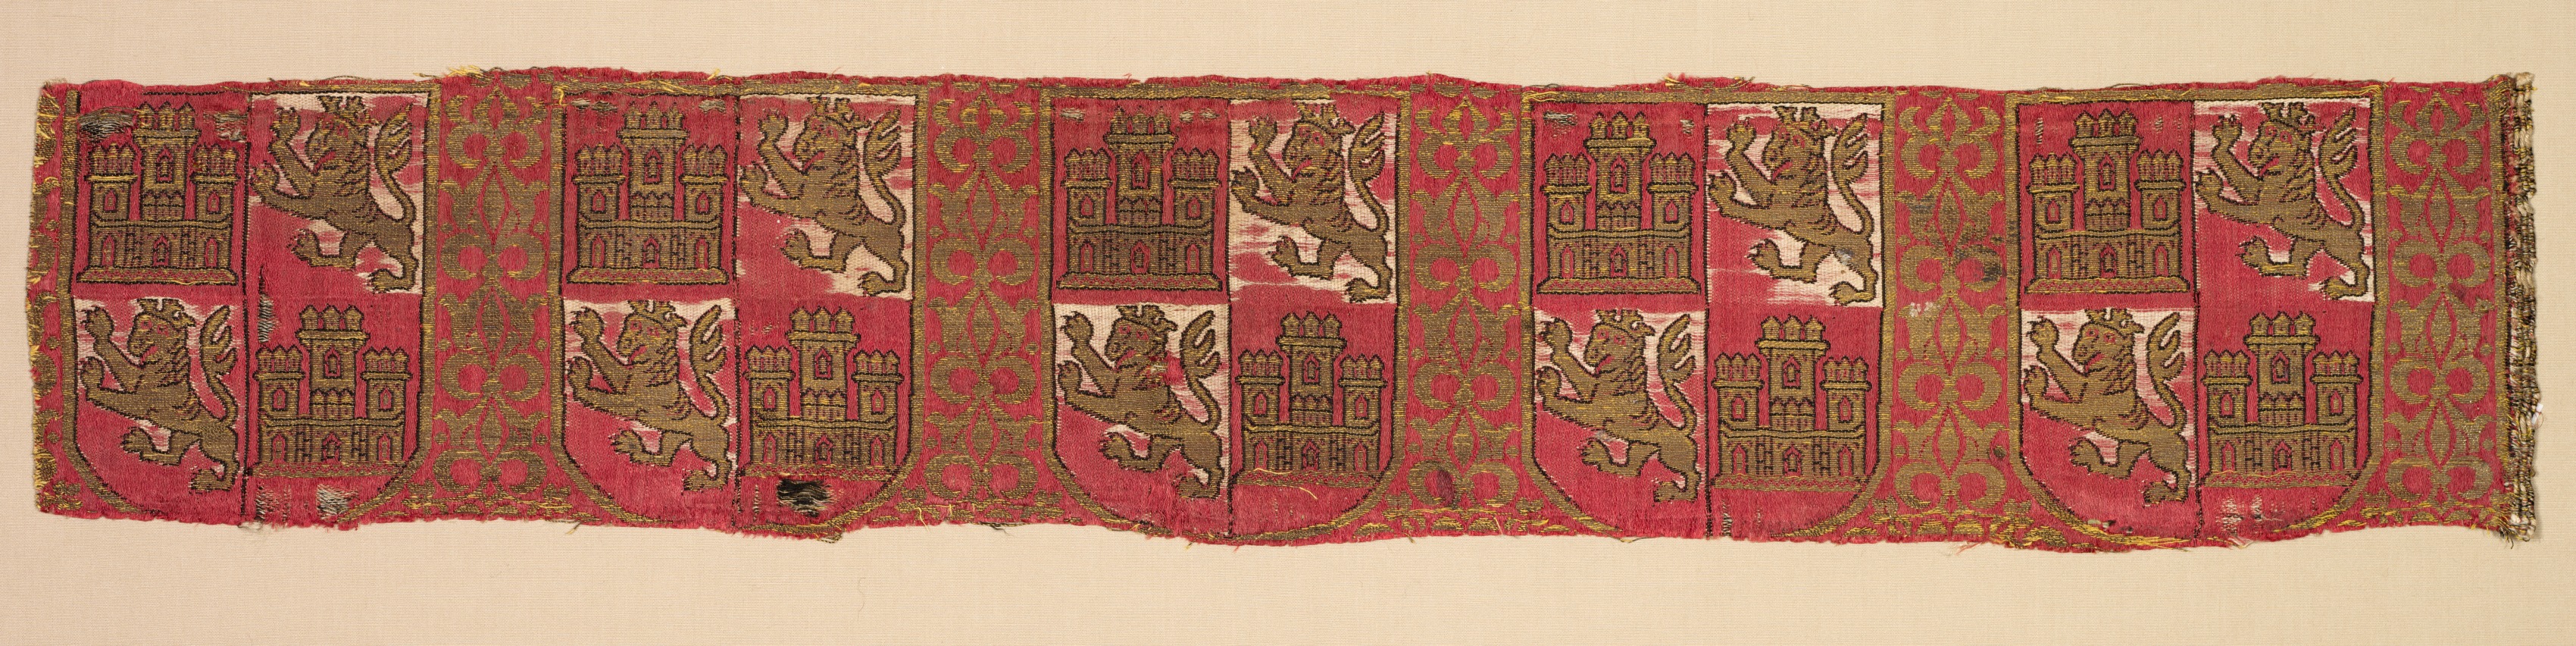 Lampas with heraldry of Castile and León, from a royal Christian robe